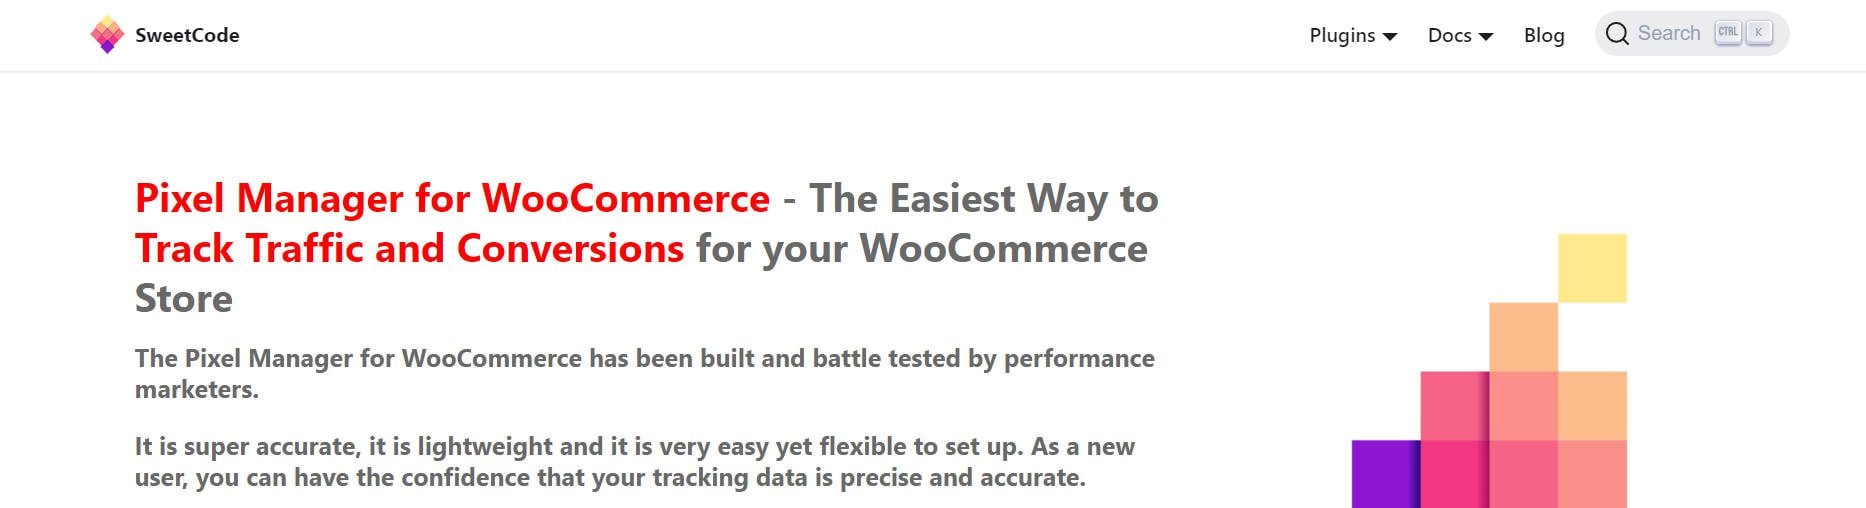 SweetCode Remarketing for WooCommerce